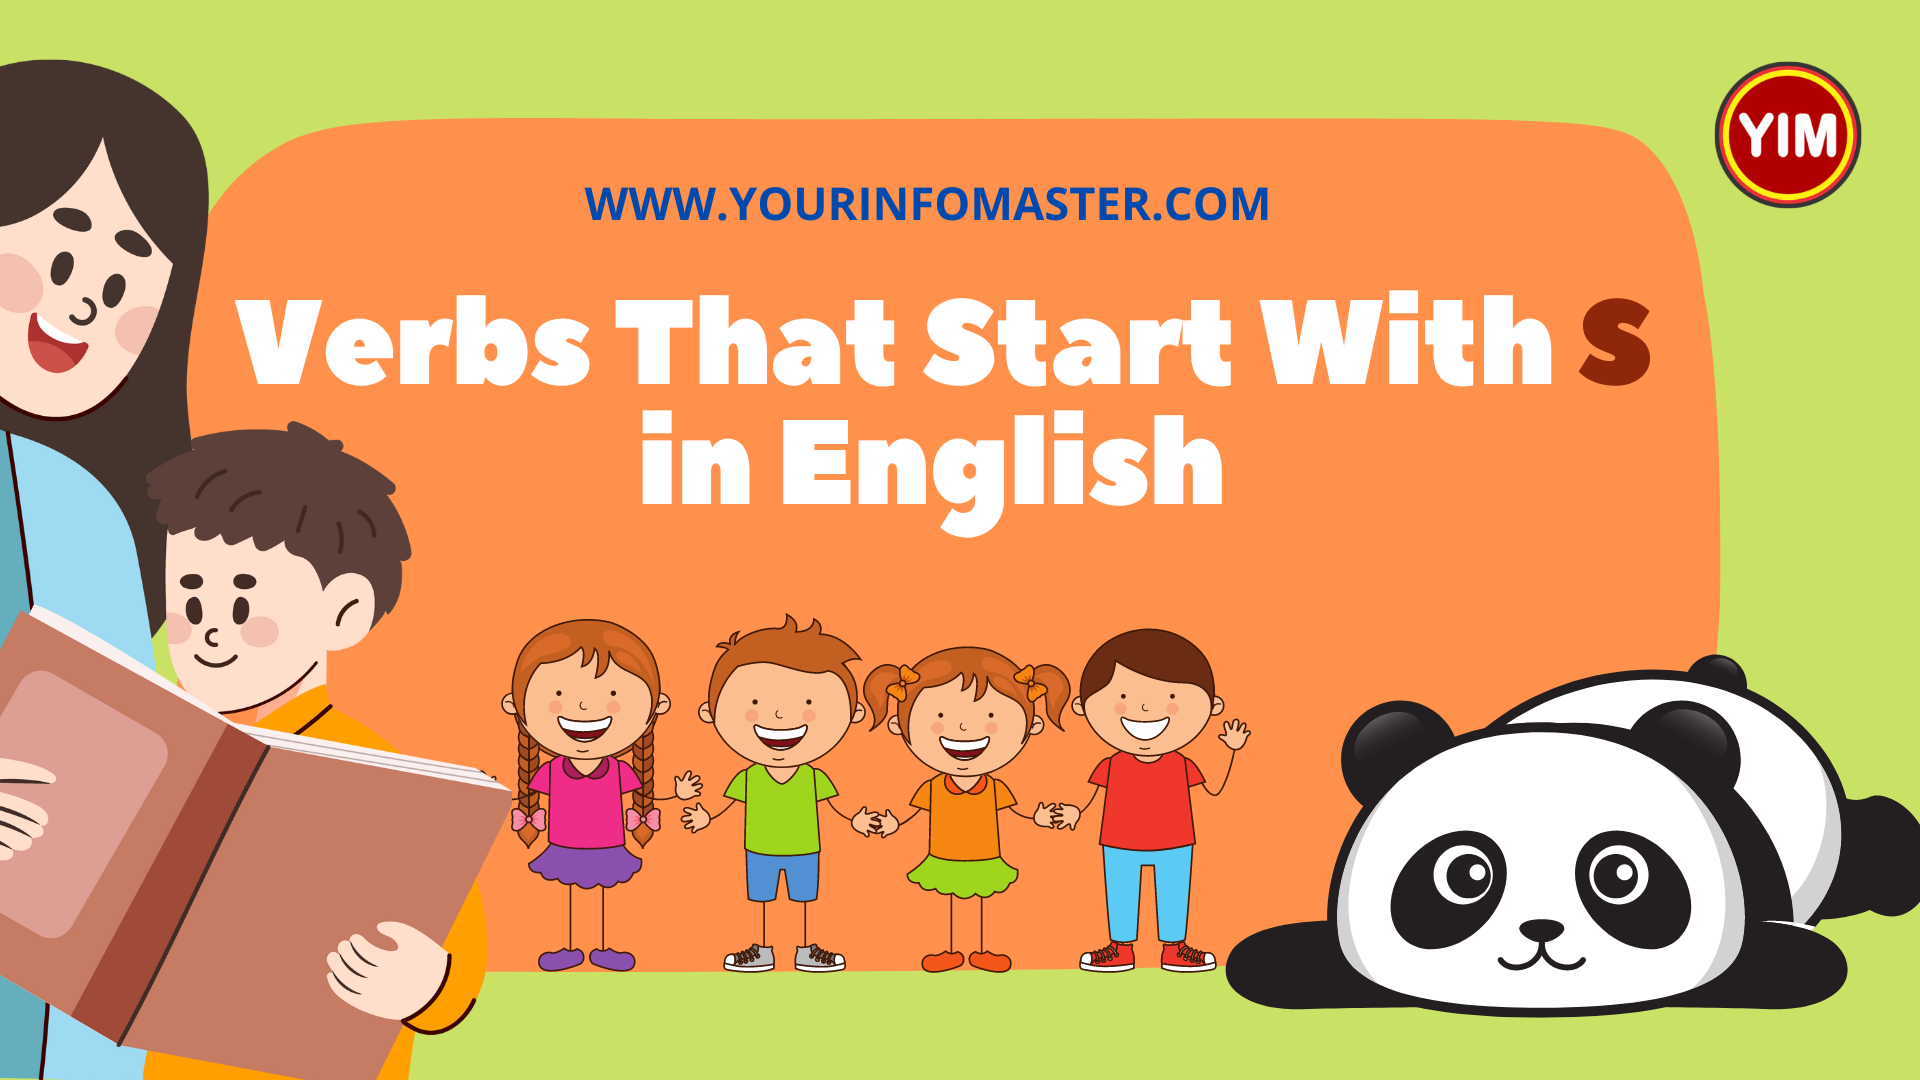 5 Letter Verbs, 5 Letter Verbs Starting With S, Action Words, Action Words That Start With S, English, English Grammar, English Vocabulary, English Words, List of Verbs That Start With S, S Action Words, S Verbs, S Verbs in English, Verbs List, Verbs That Start With S, Vocabulary, Words That Start with s